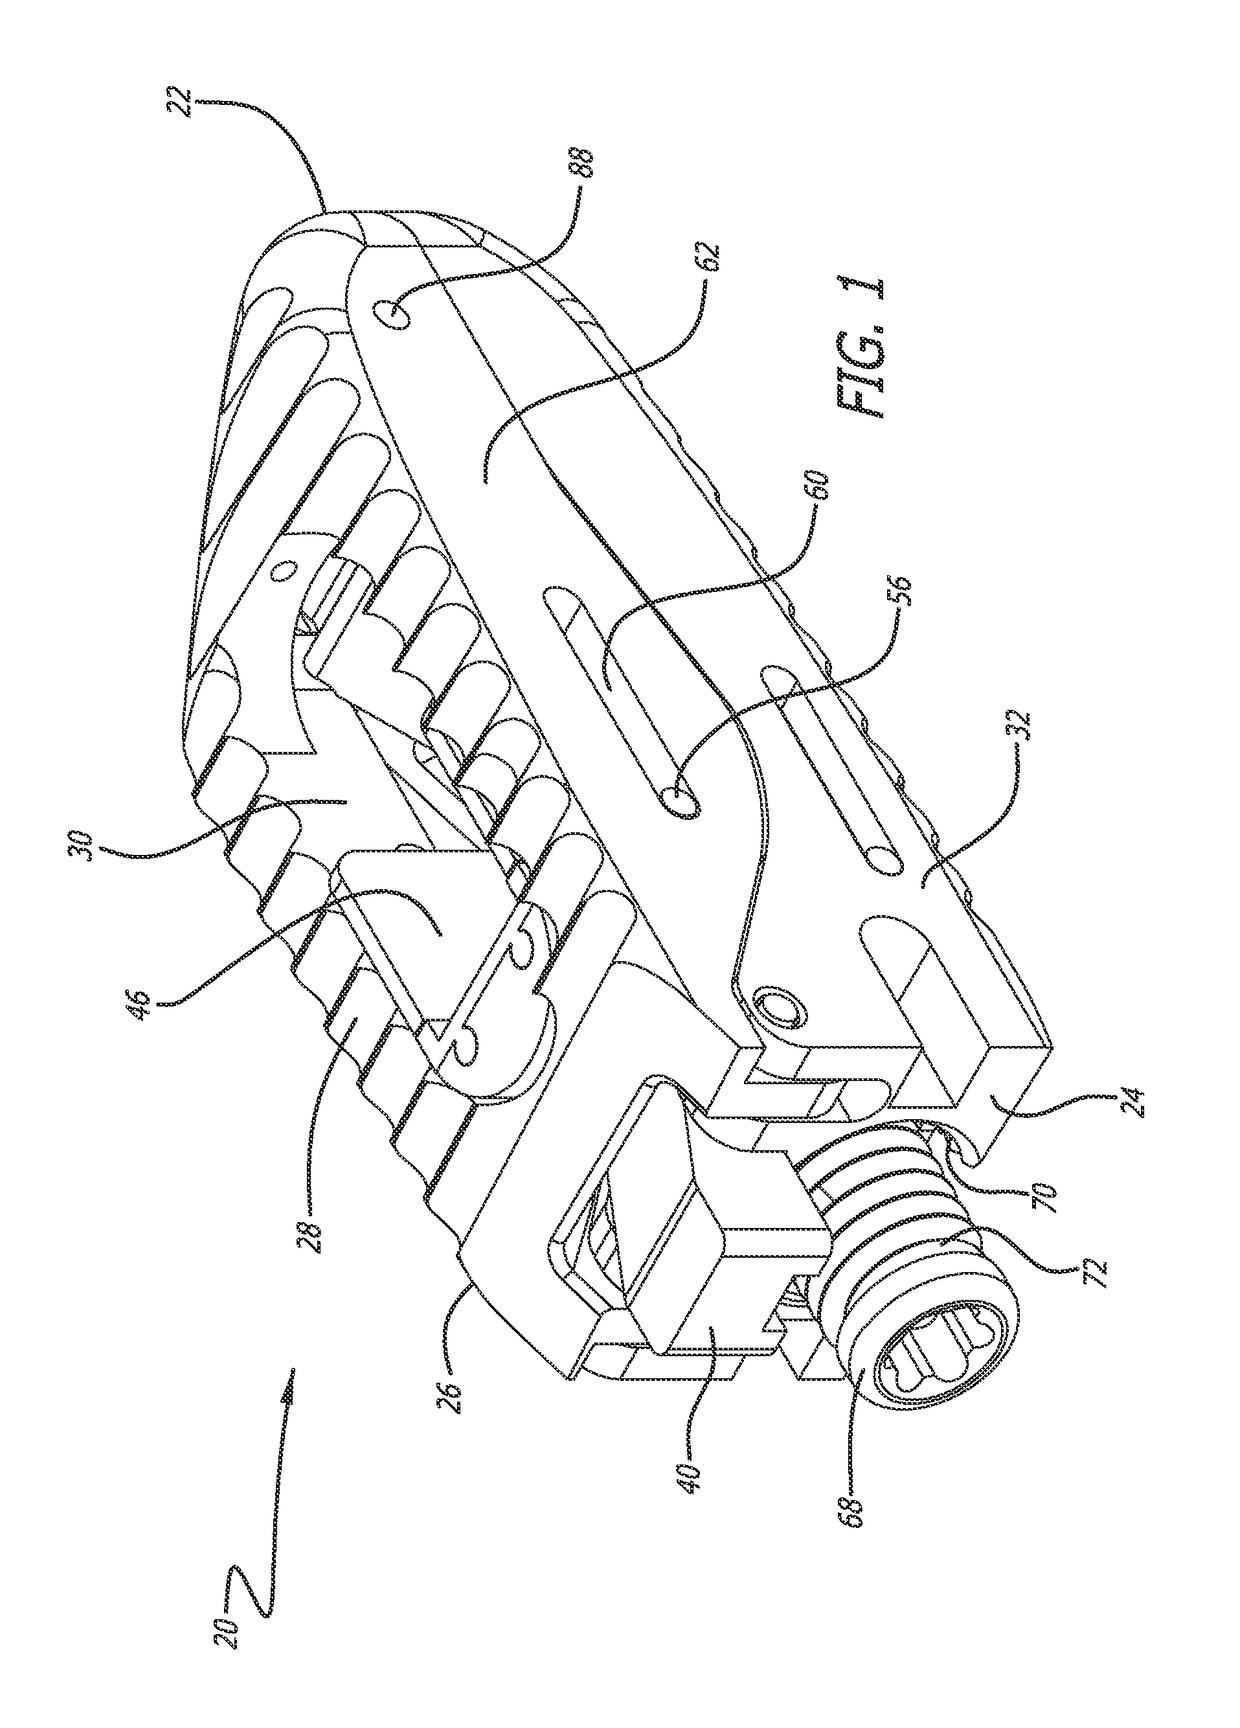 Expandable interbody implant